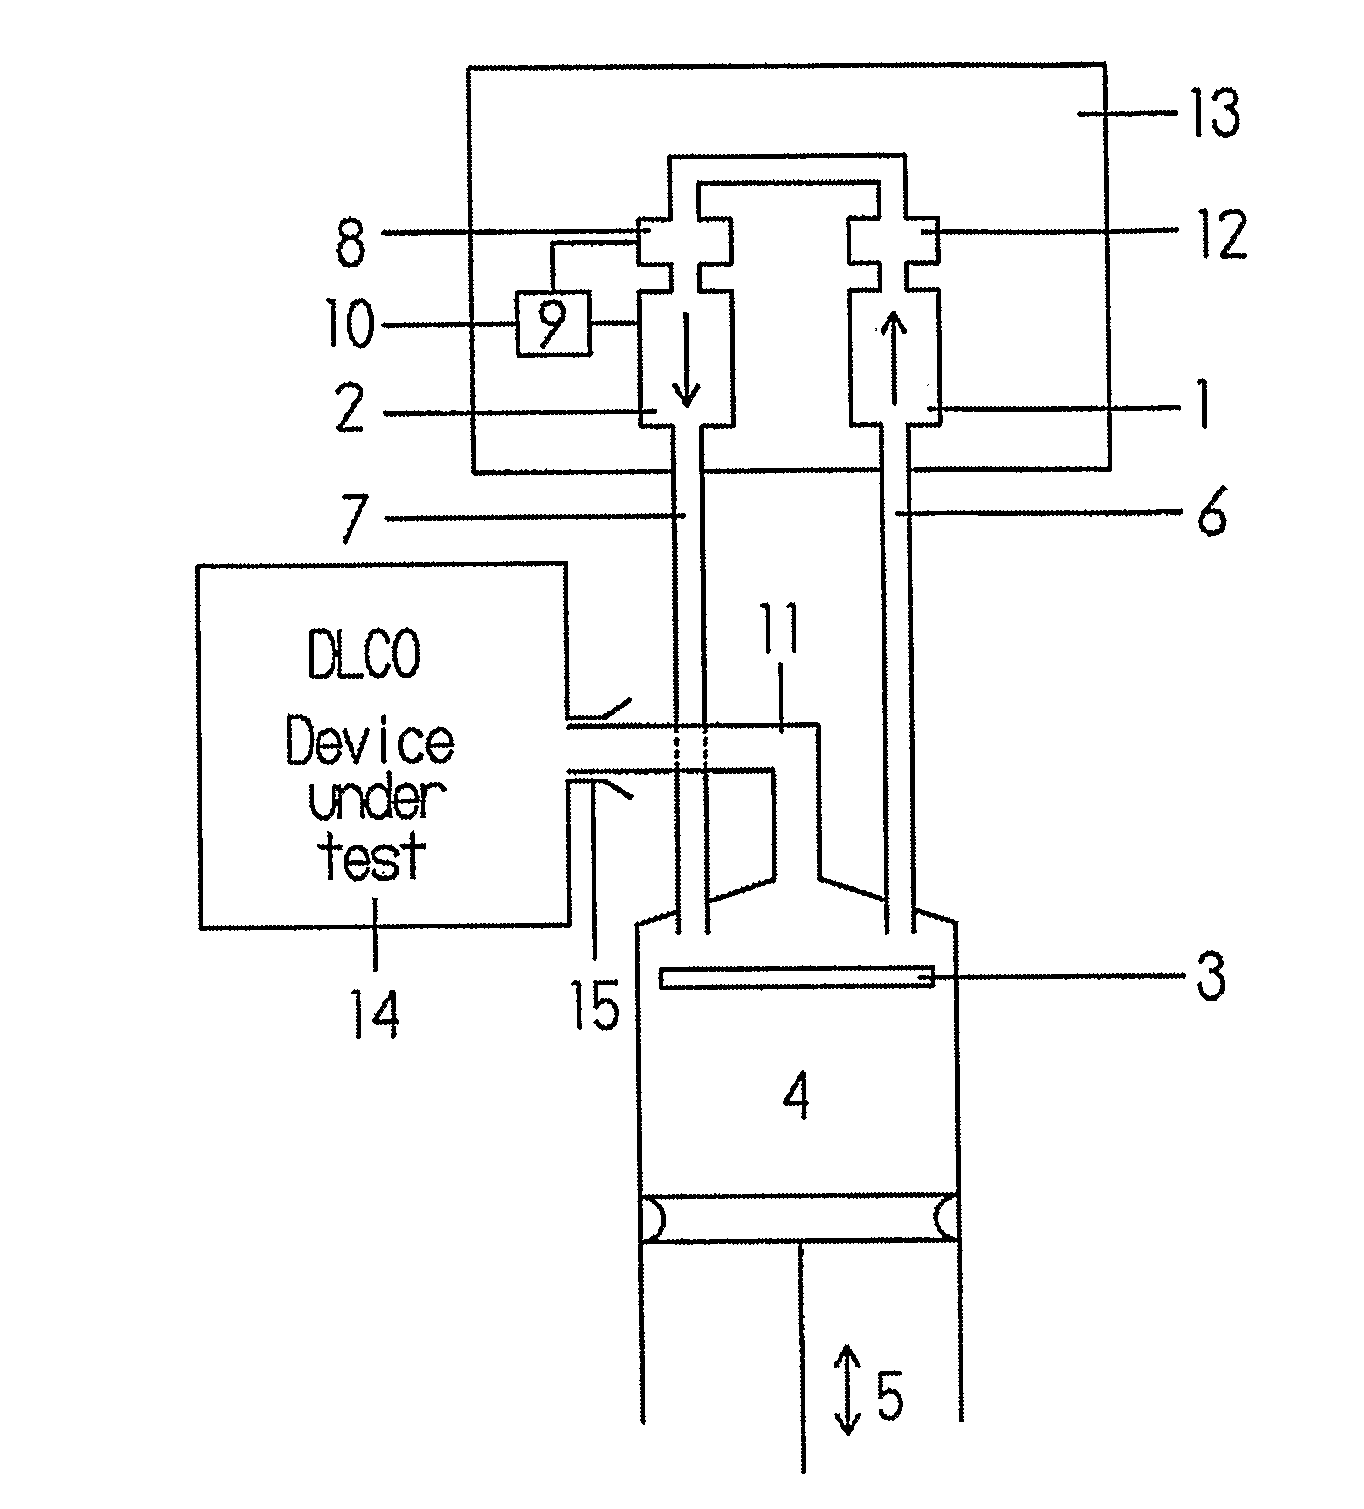 Method and apparatus for evaluation of a device for measuring lung diffusion capacity